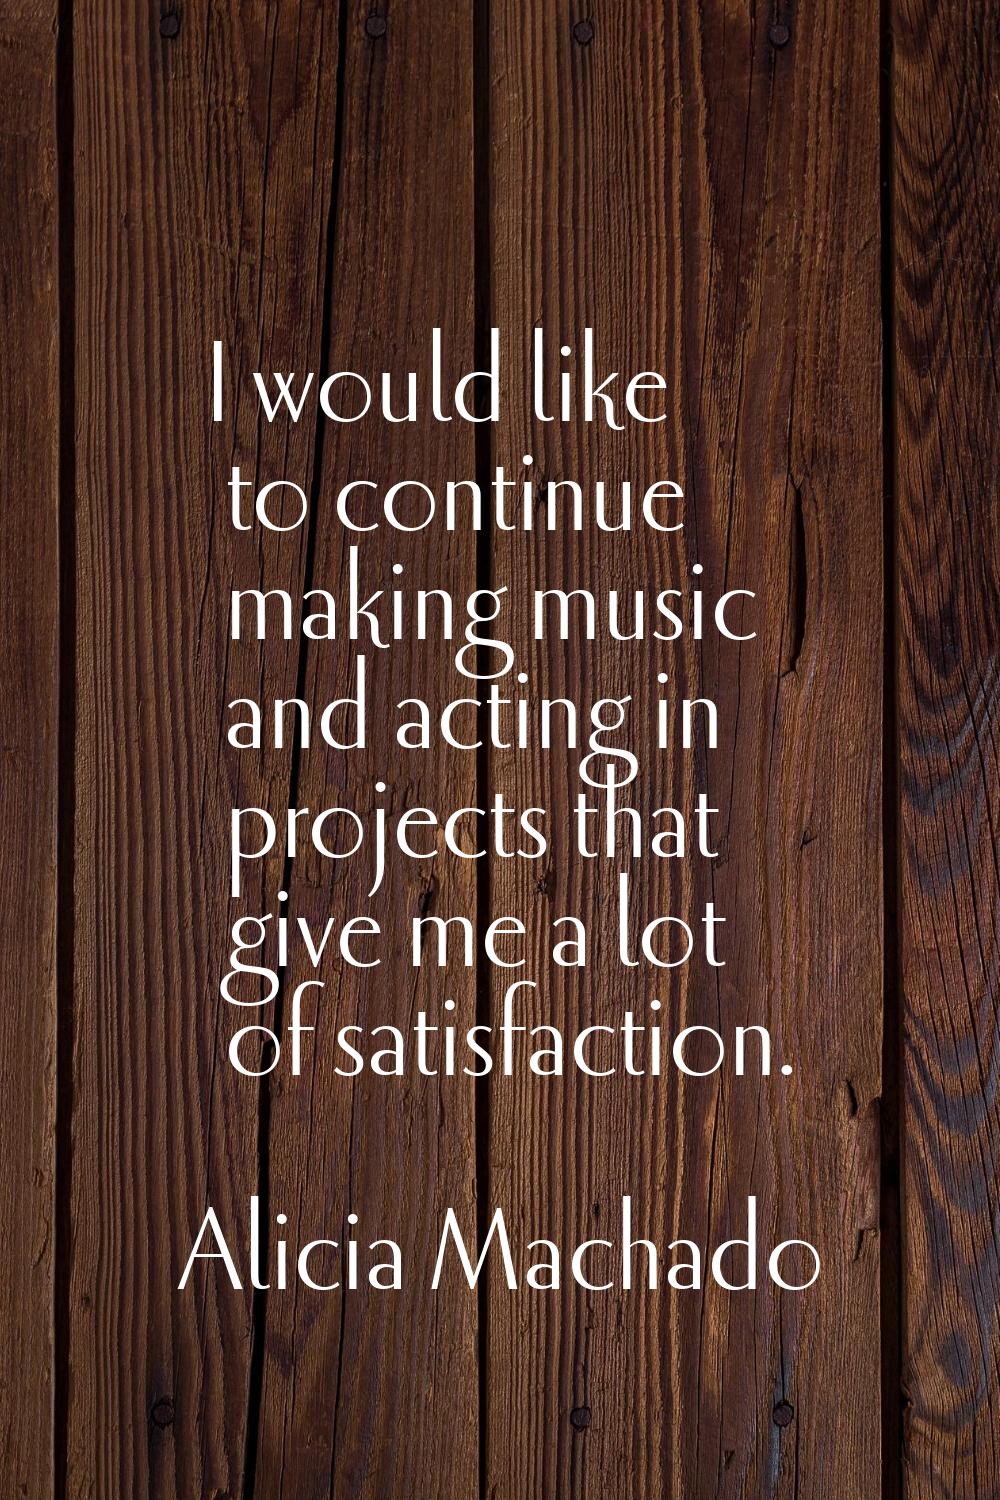 I would like to continue making music and acting in projects that give me a lot of satisfaction.